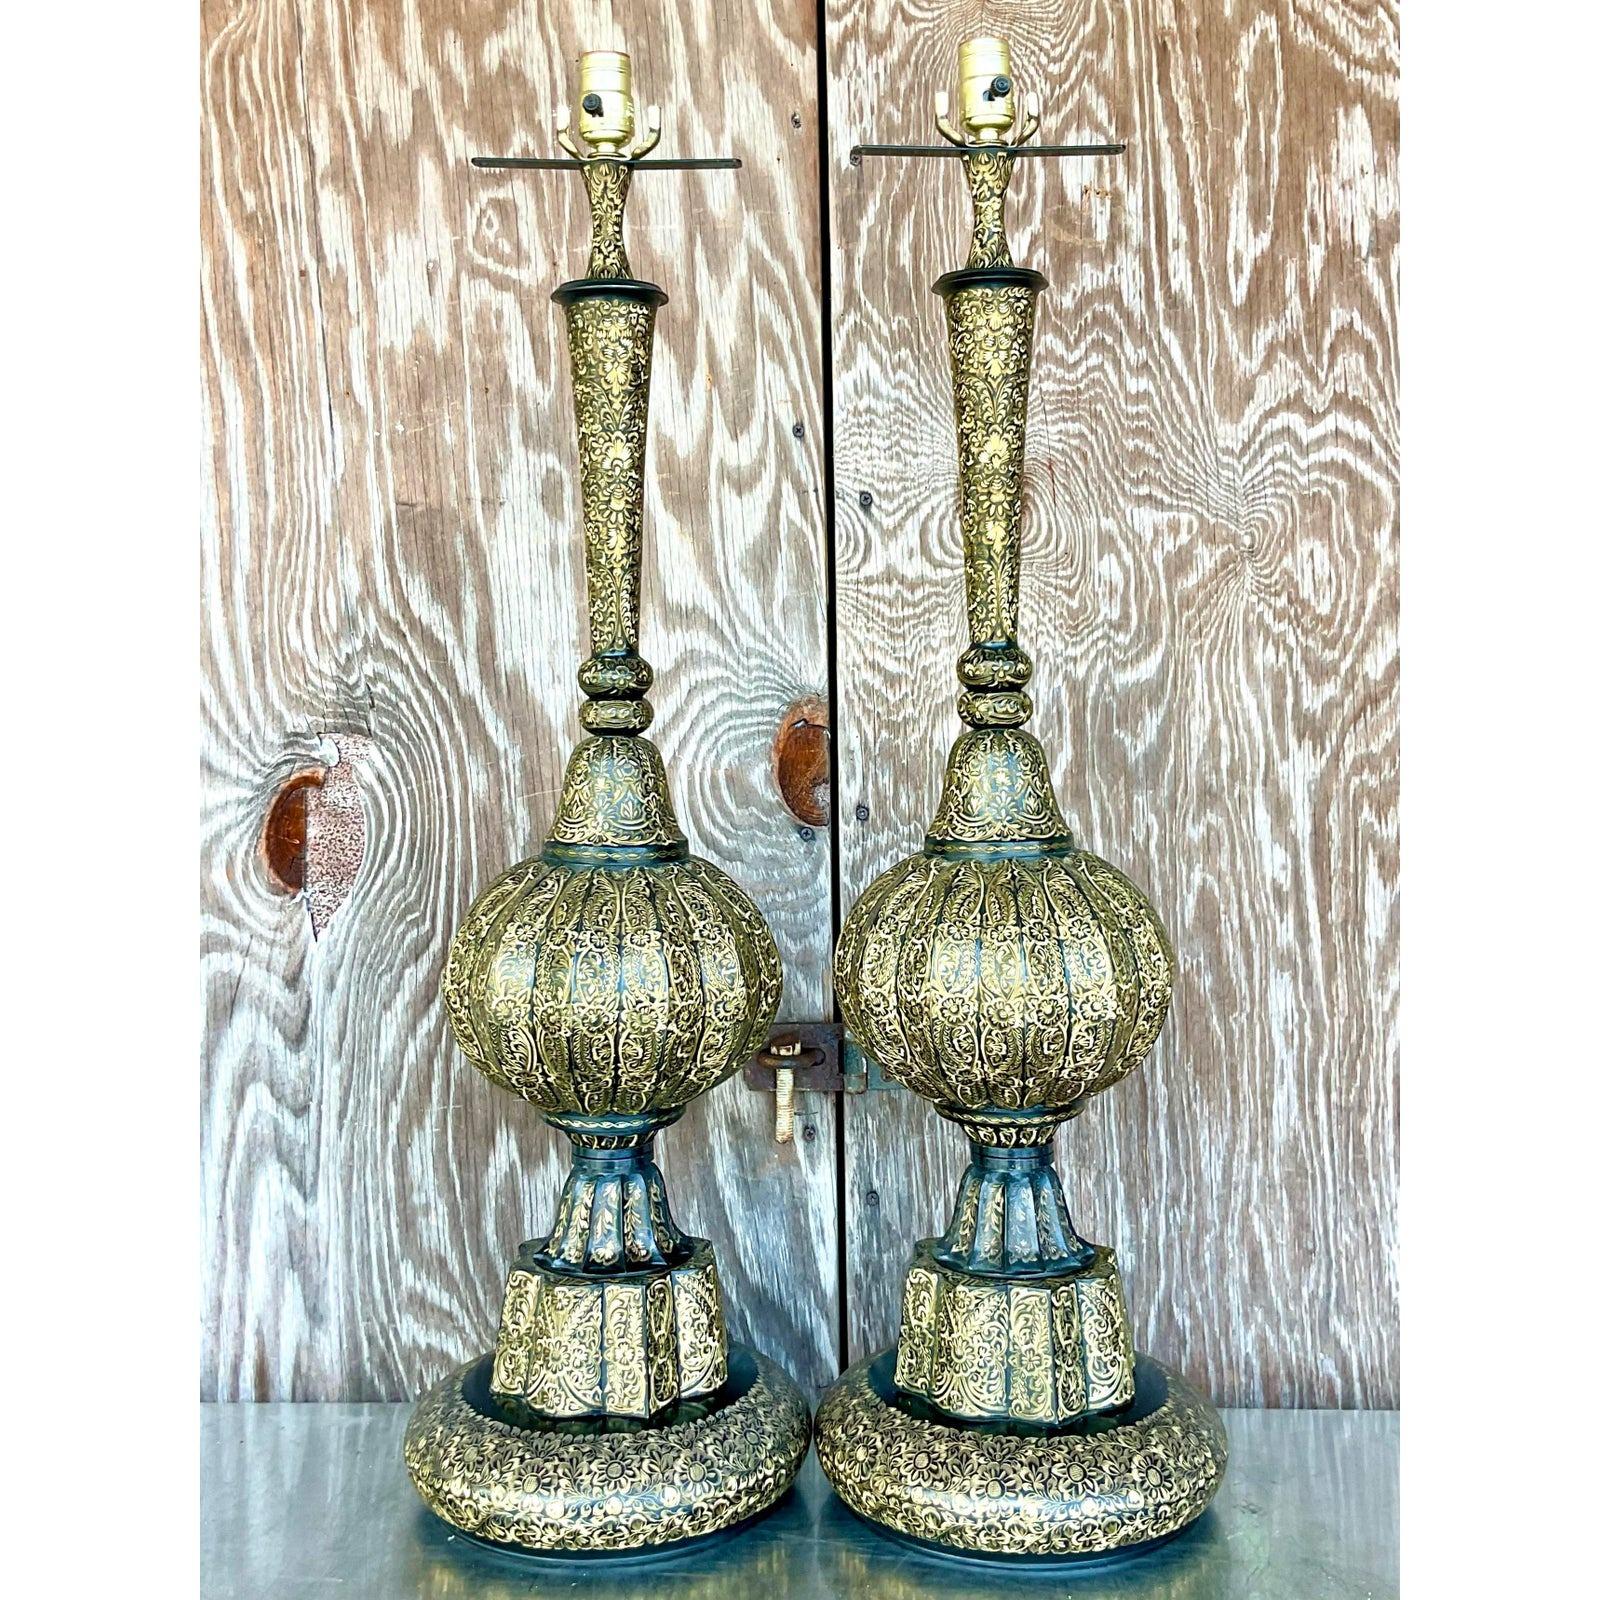 A fabulous pair of vintage Boho table lamps. Monumental in size and drama. Beautiful Moroccan shape with etched enamel and brass. A striking look. Acquired from a palm Beach estate.